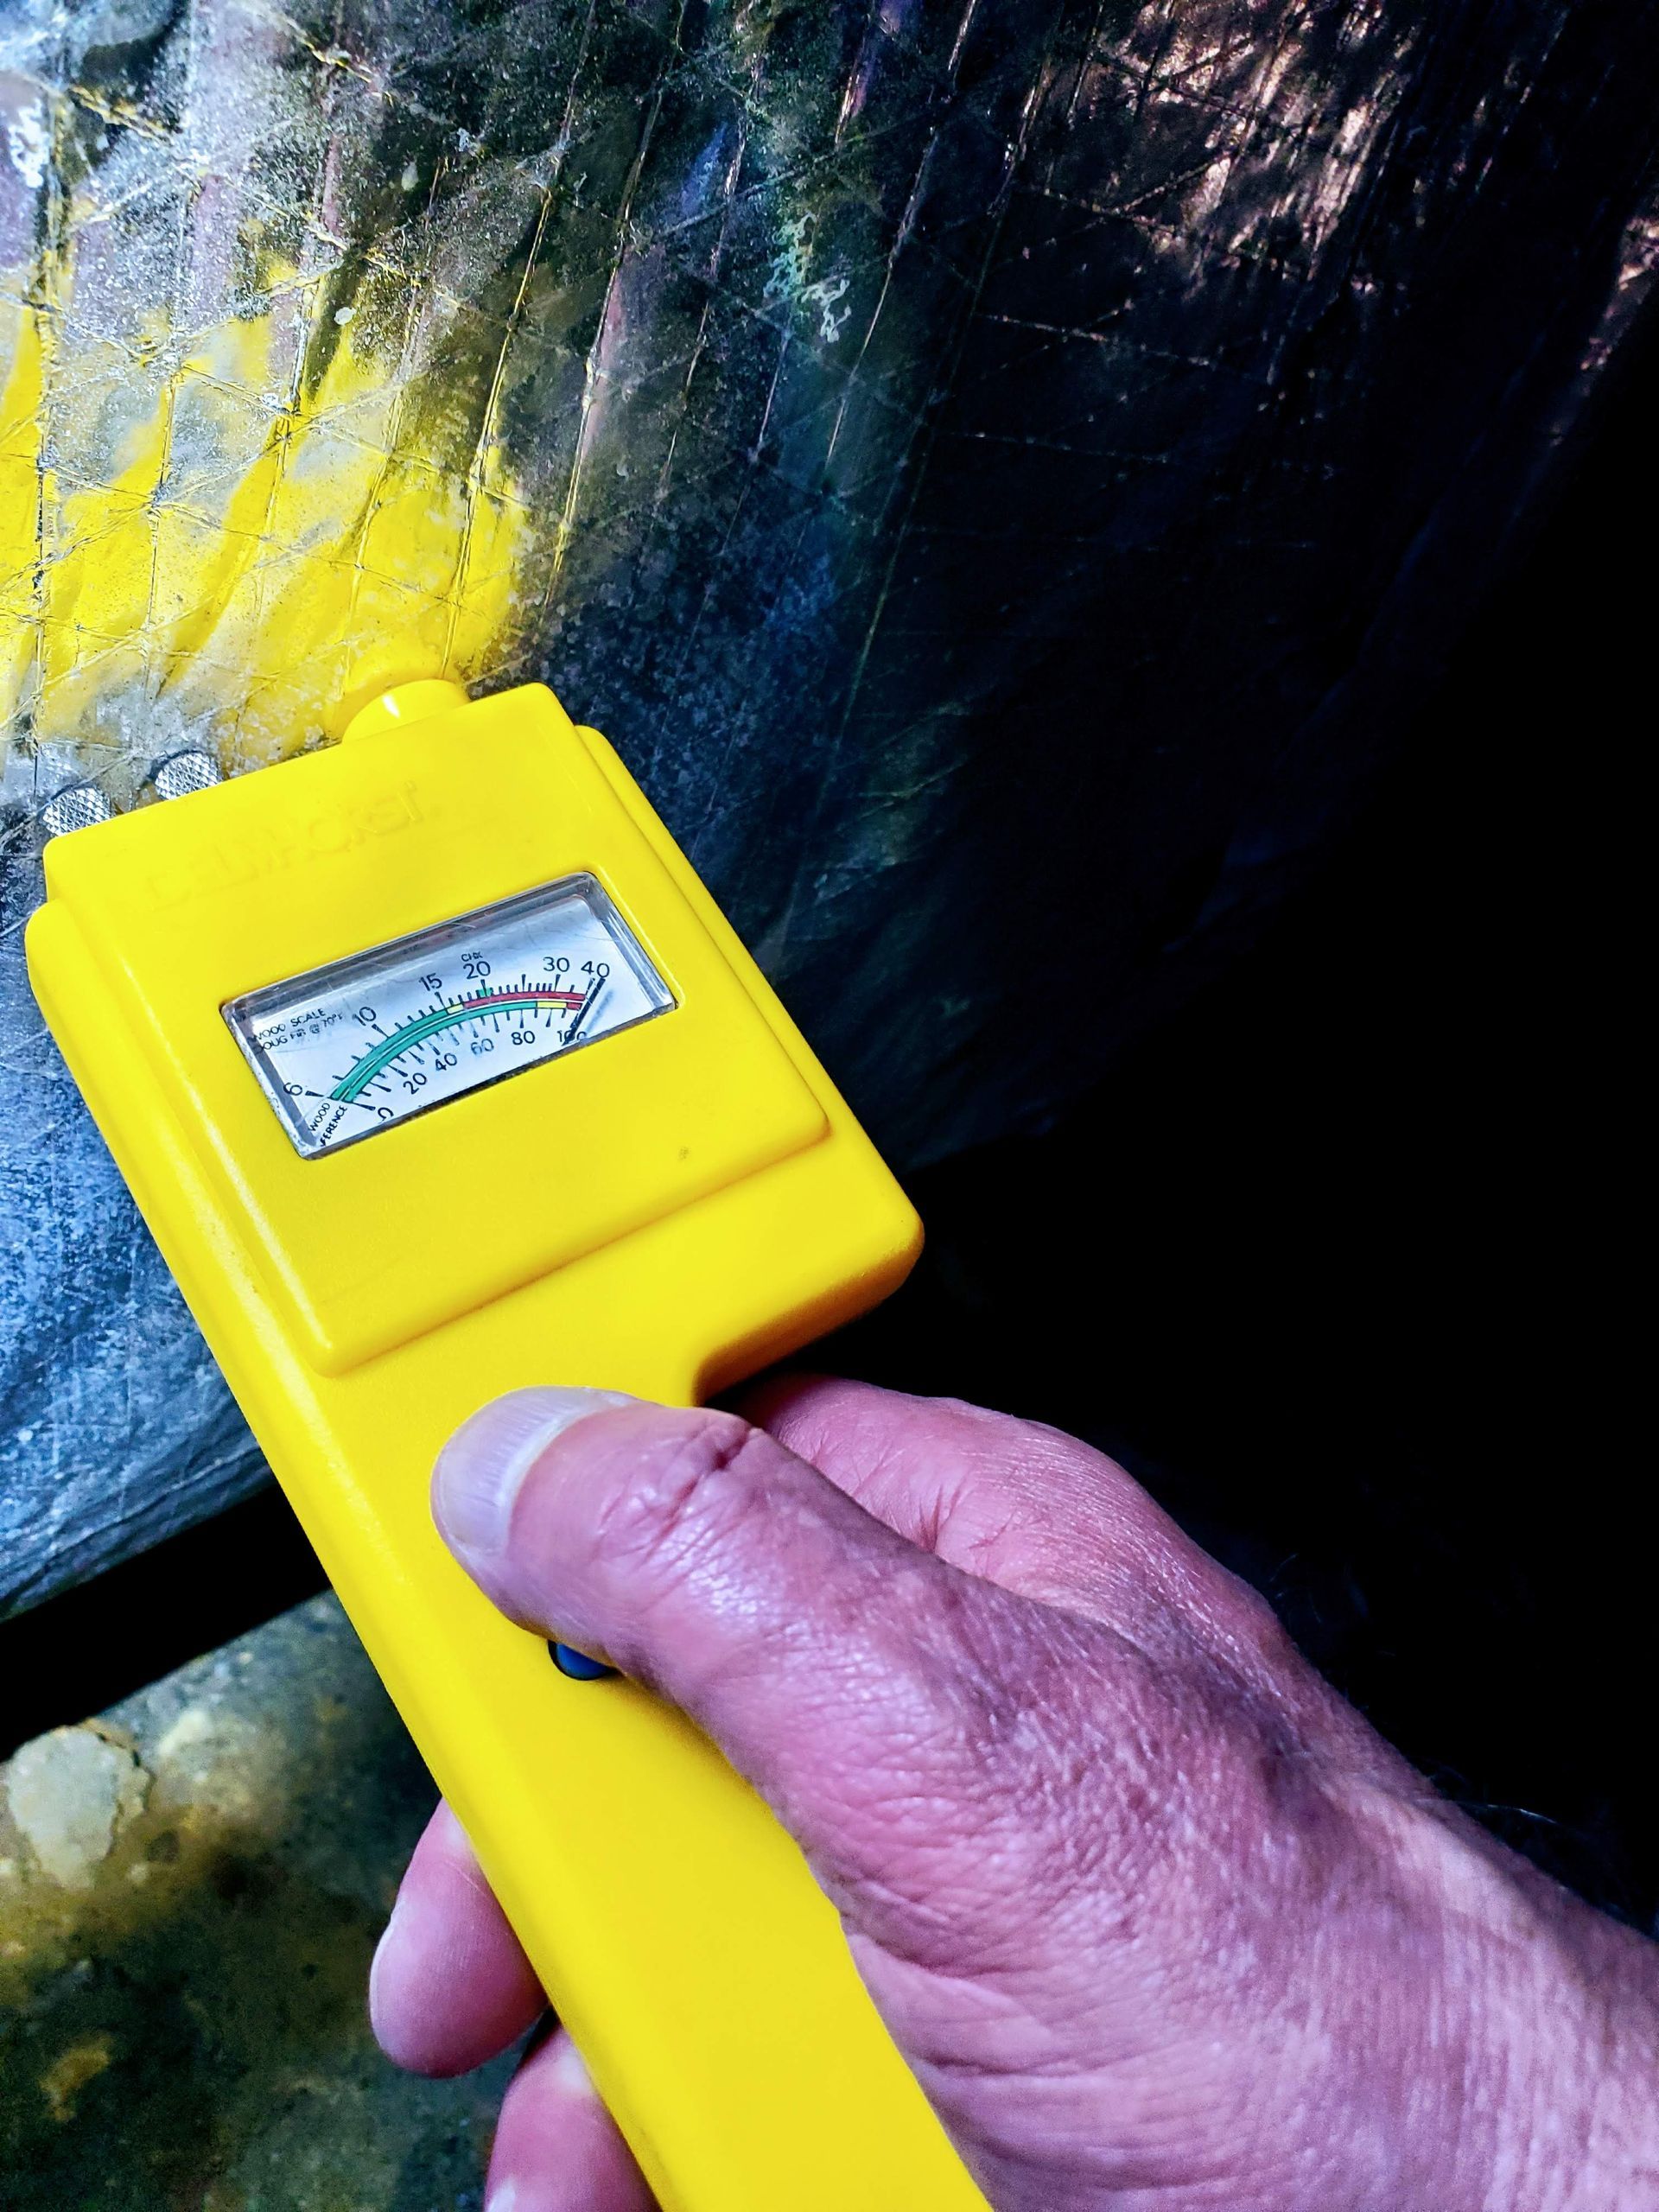 a person is holding a yellow device that says ' moisture meter ' on it